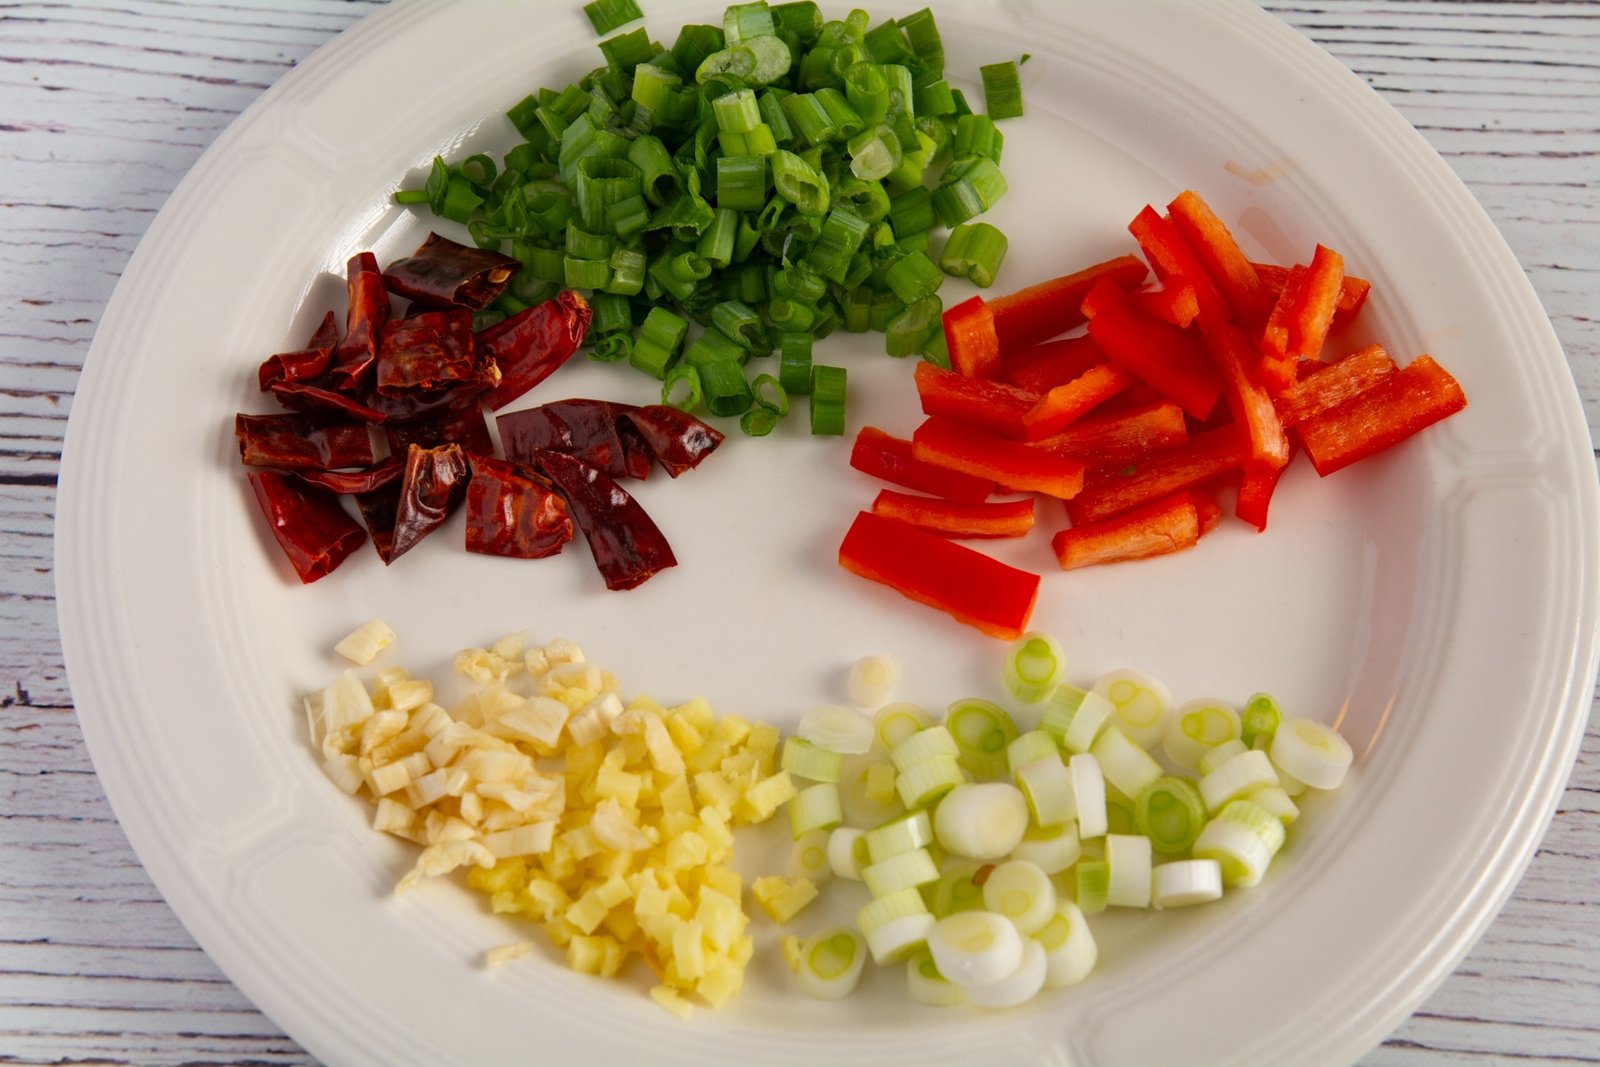 Vegetable ingredients prepared and on a plate